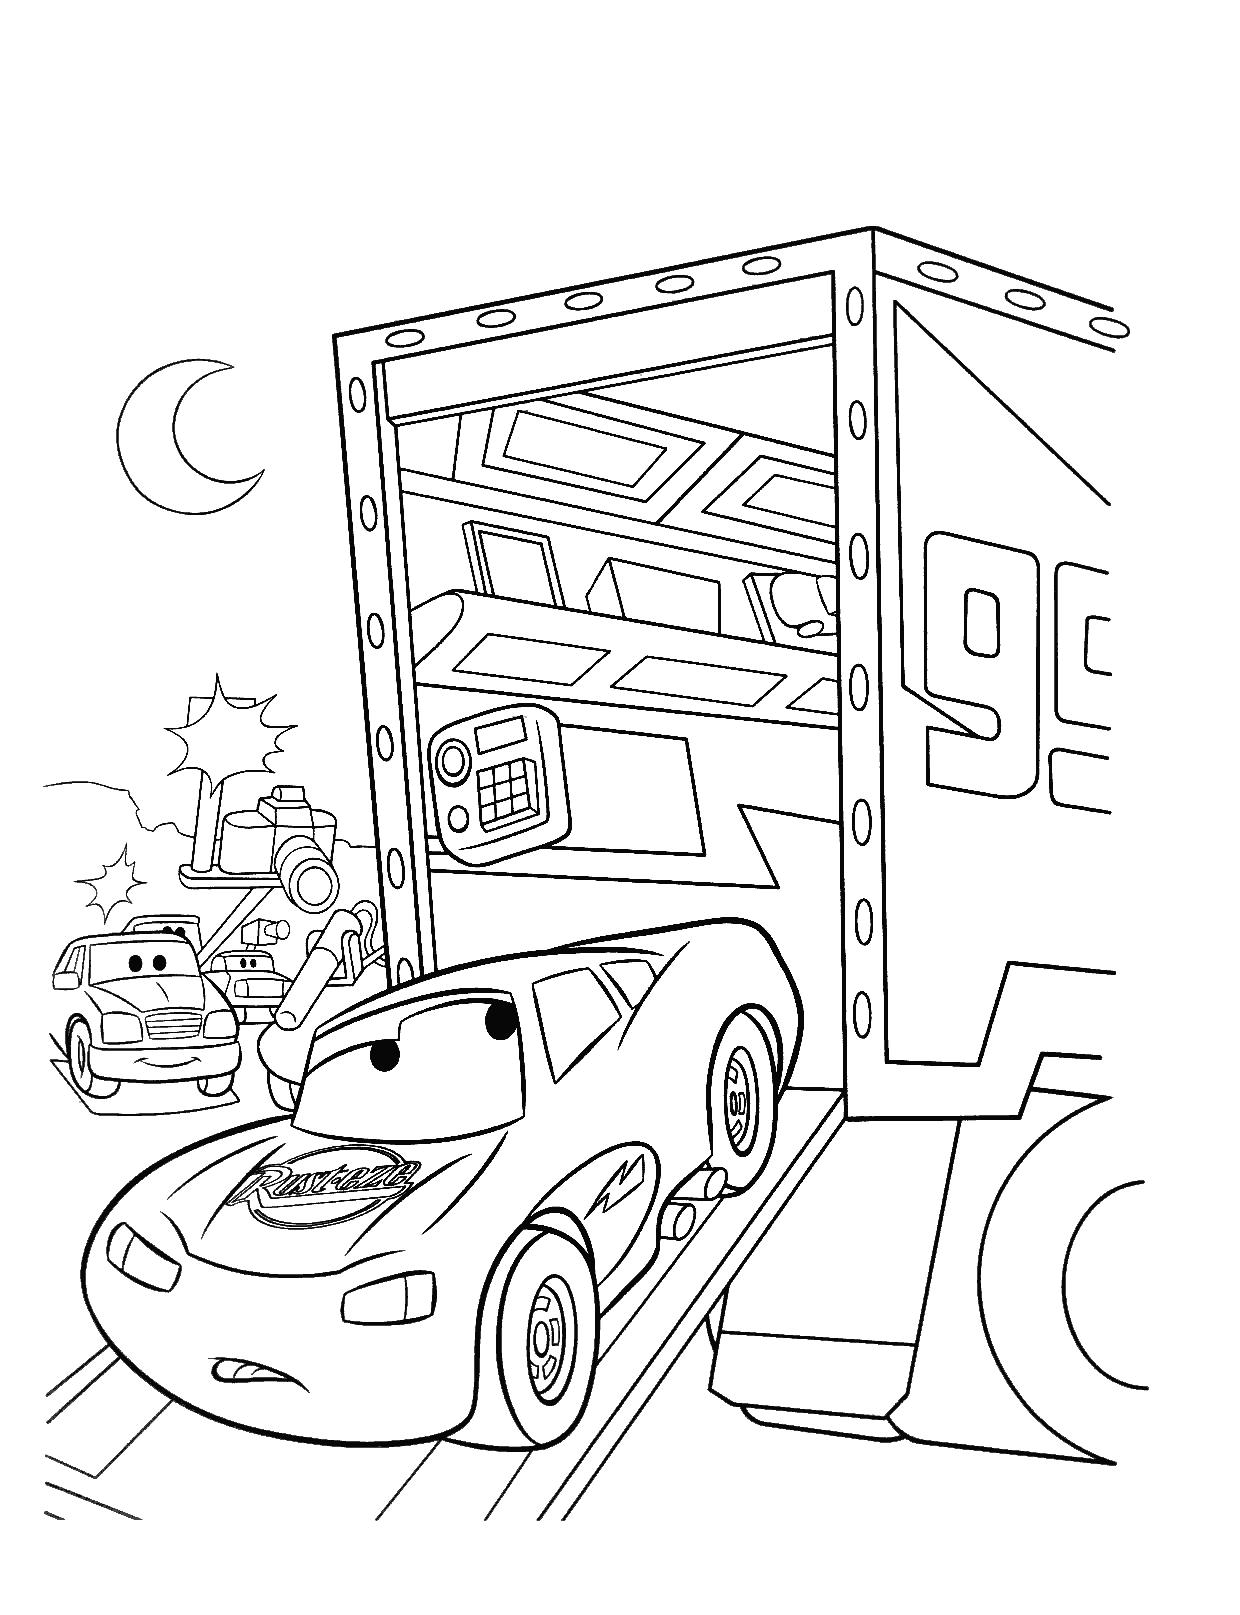 Cars to color for kids   Cars Kids Coloring Pages